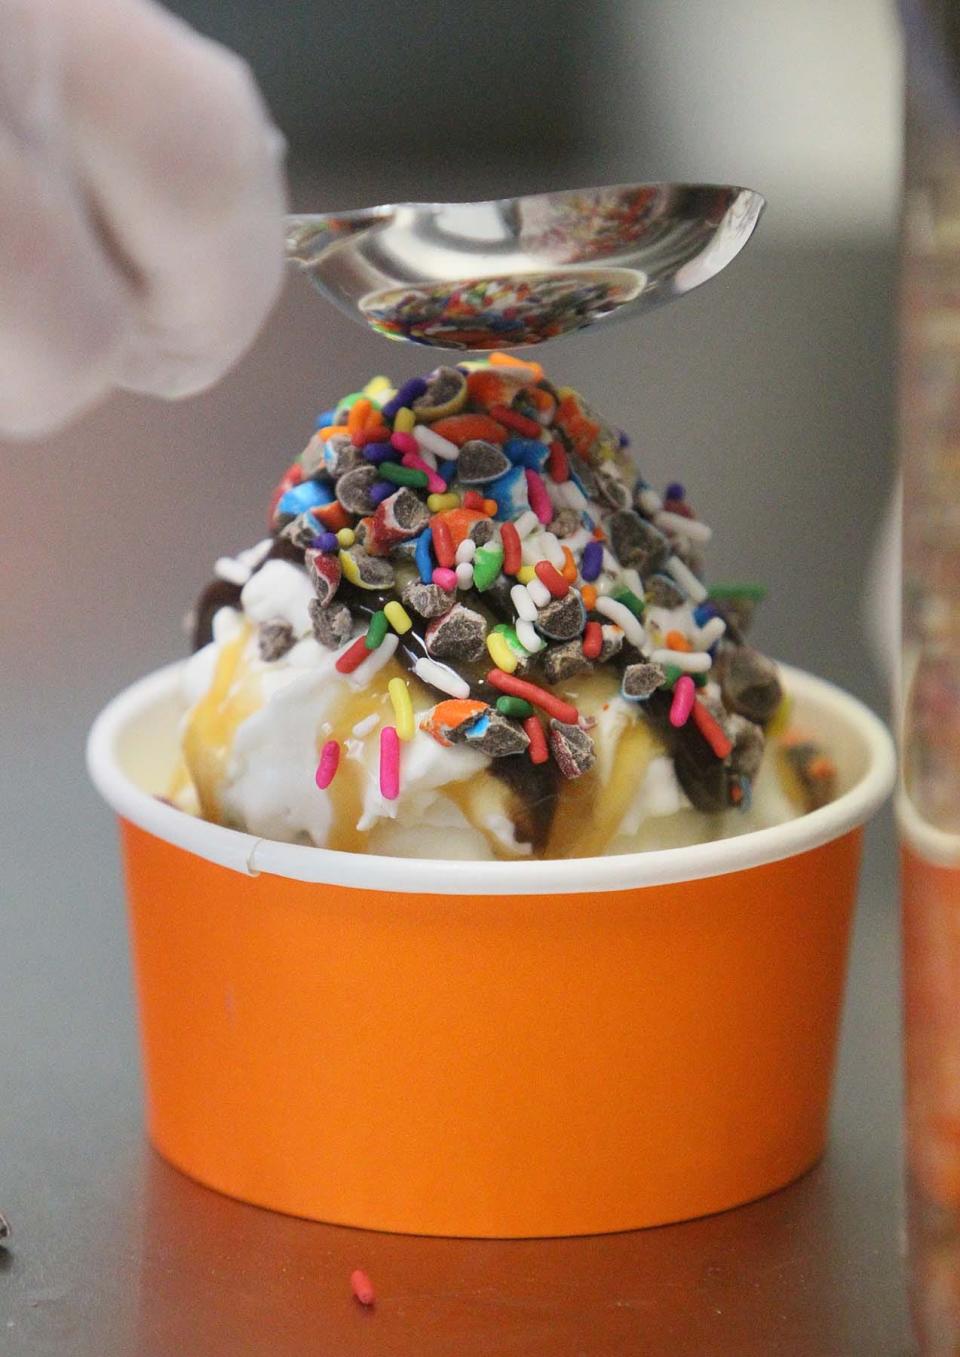 Travis Monty-Bromer, the owner of Penguin Ice Cream in Copley, makes a Create-Your-Own-Sundae made with cookies and cream ice cream, whipped cream, chocolate and caramel syrups, chocolate chunks and sprinkles.